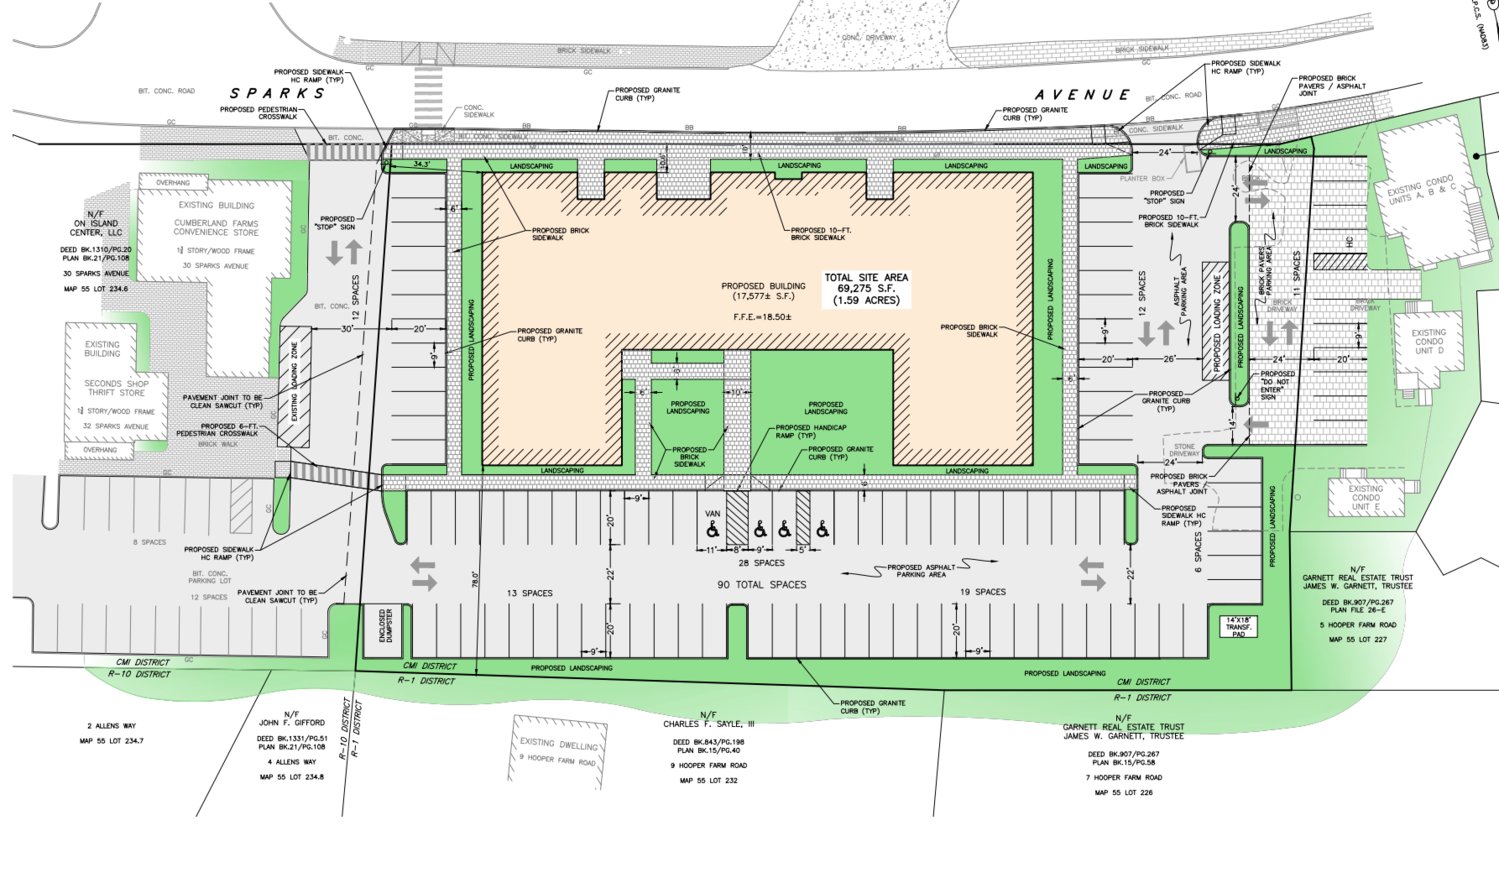 Developer Chris Fiumara's plan for a mixed-use building on Sparks Avenue across from the Stop & Shop.